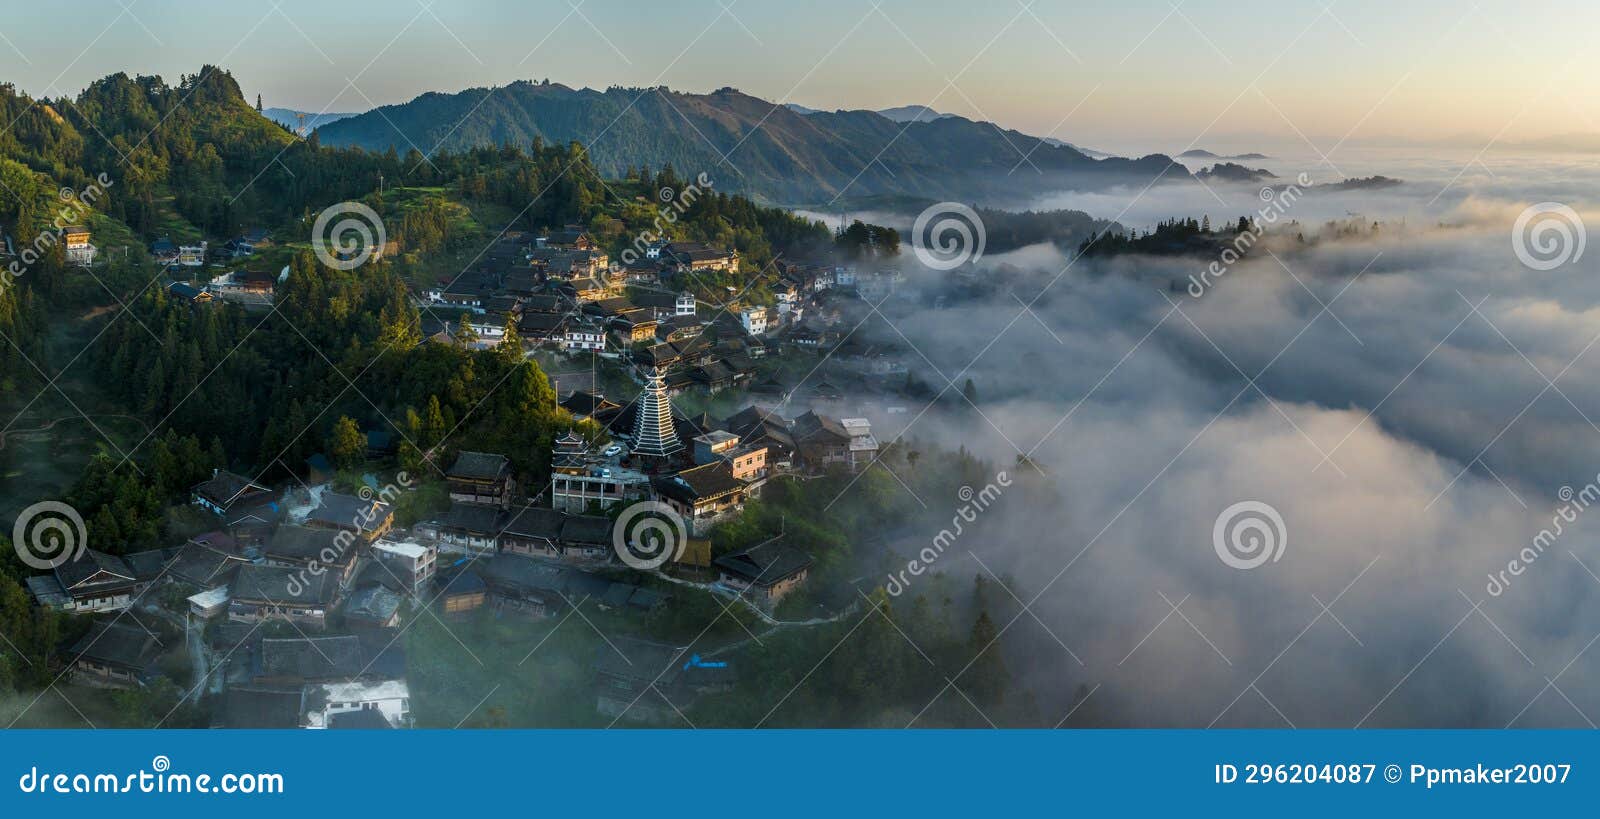 the morning sea of clouds in dong villages